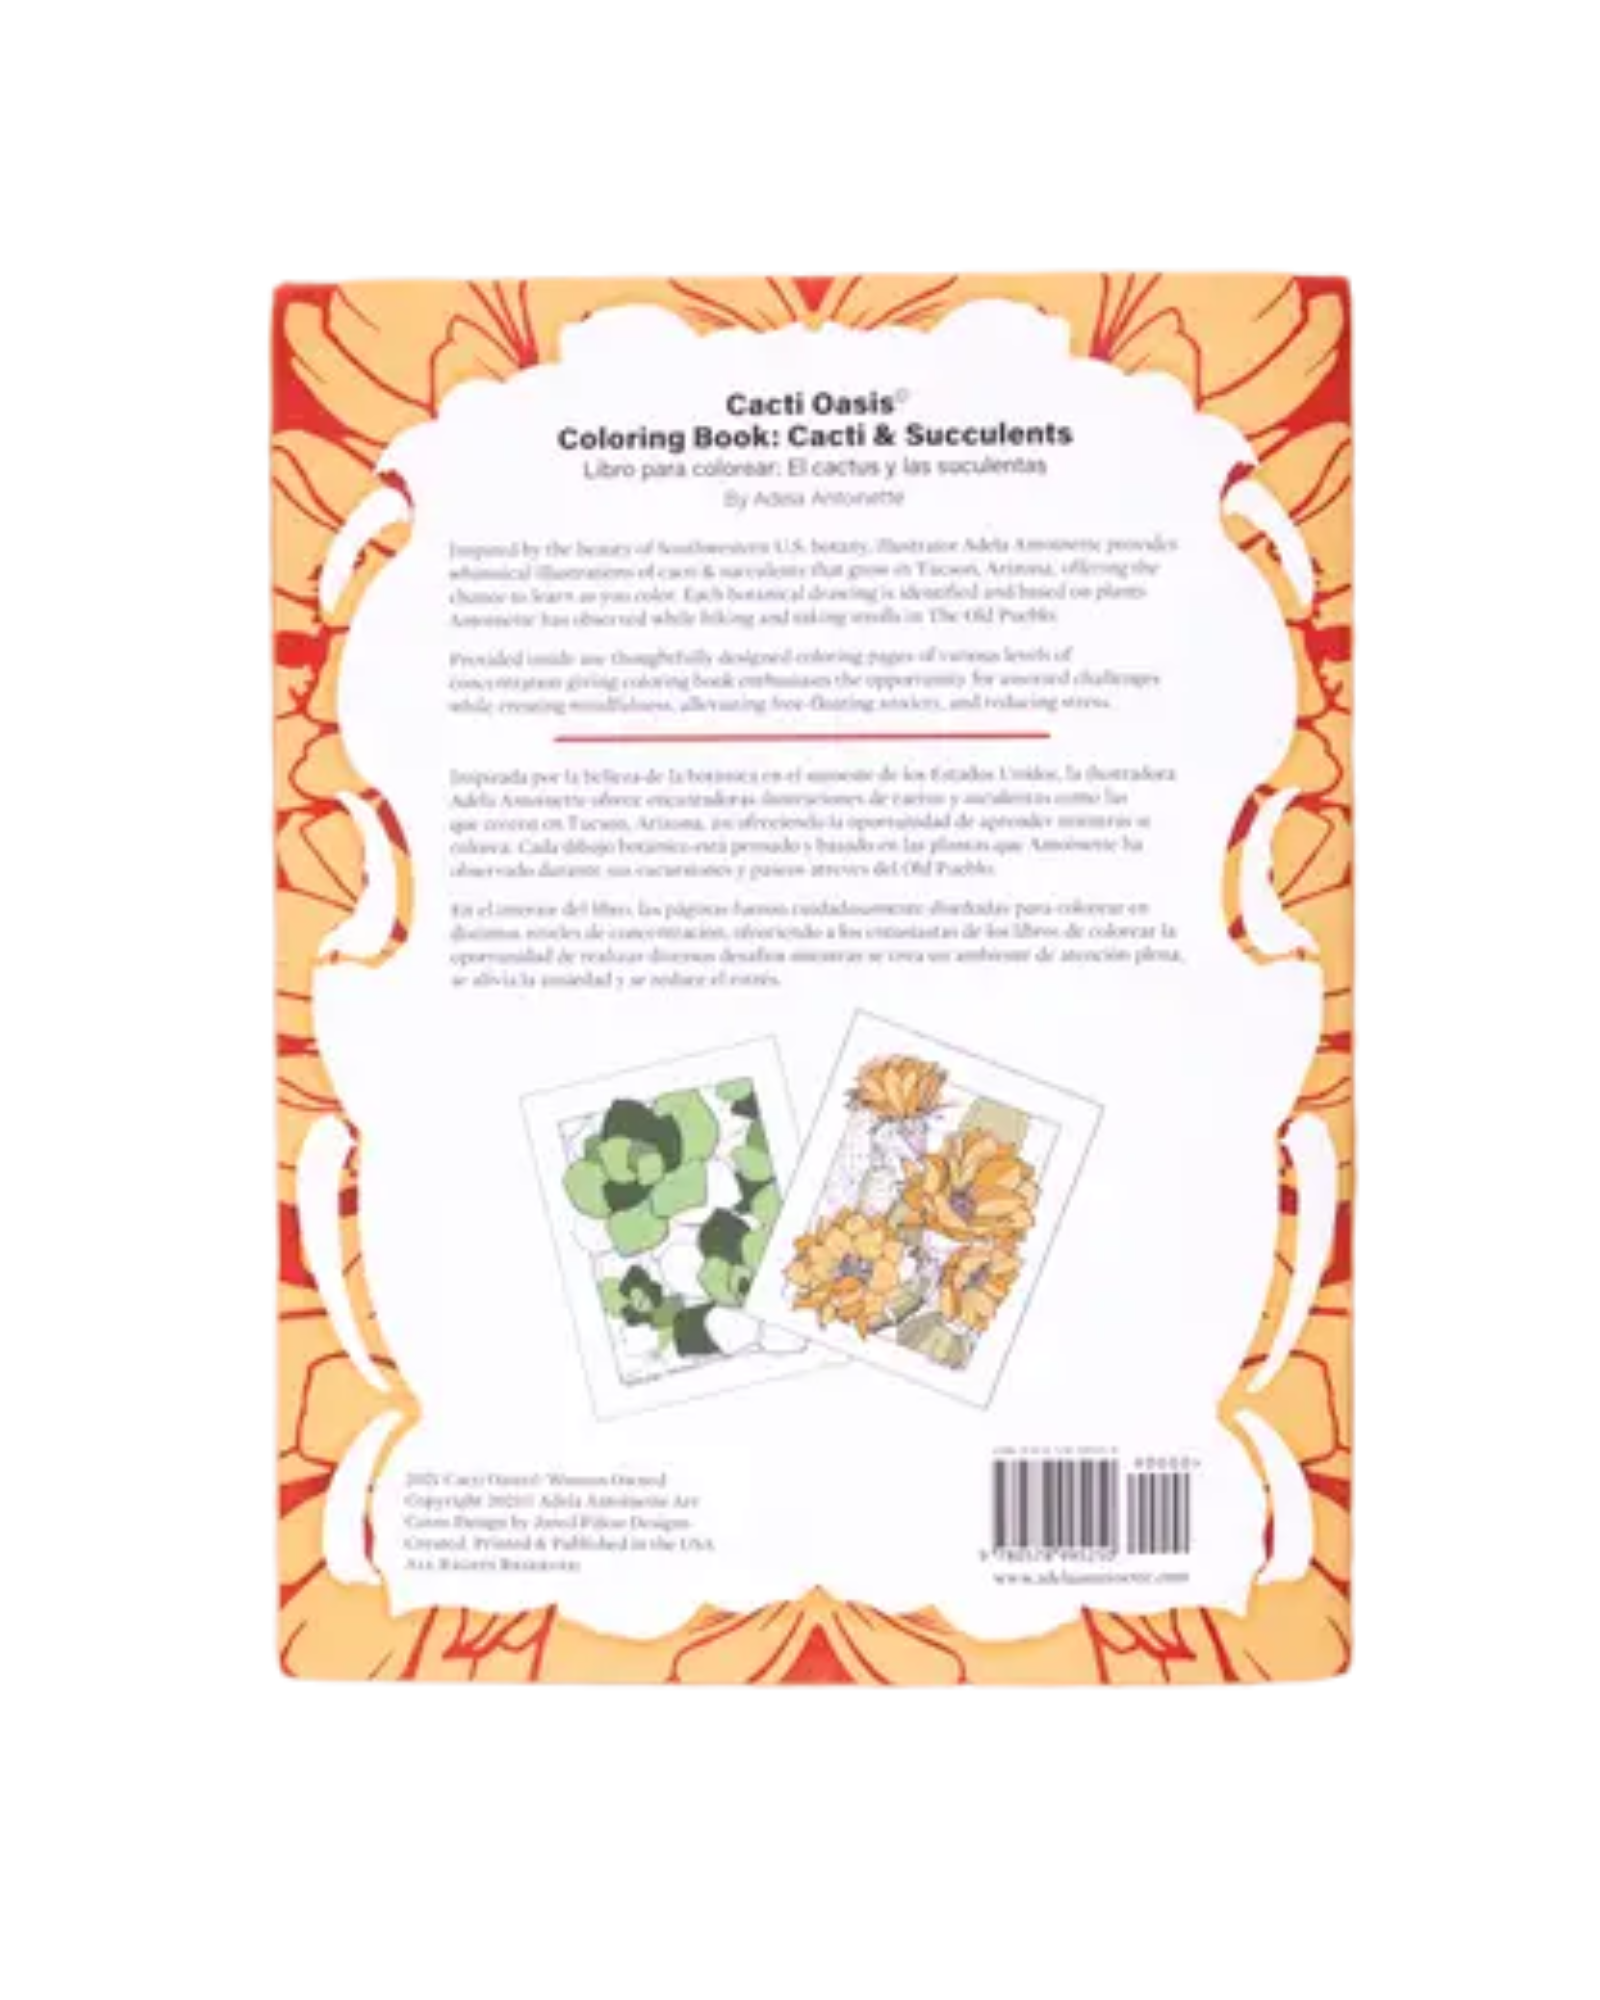 Back cover of coloring book featuring a description of the book and colored in sample pages